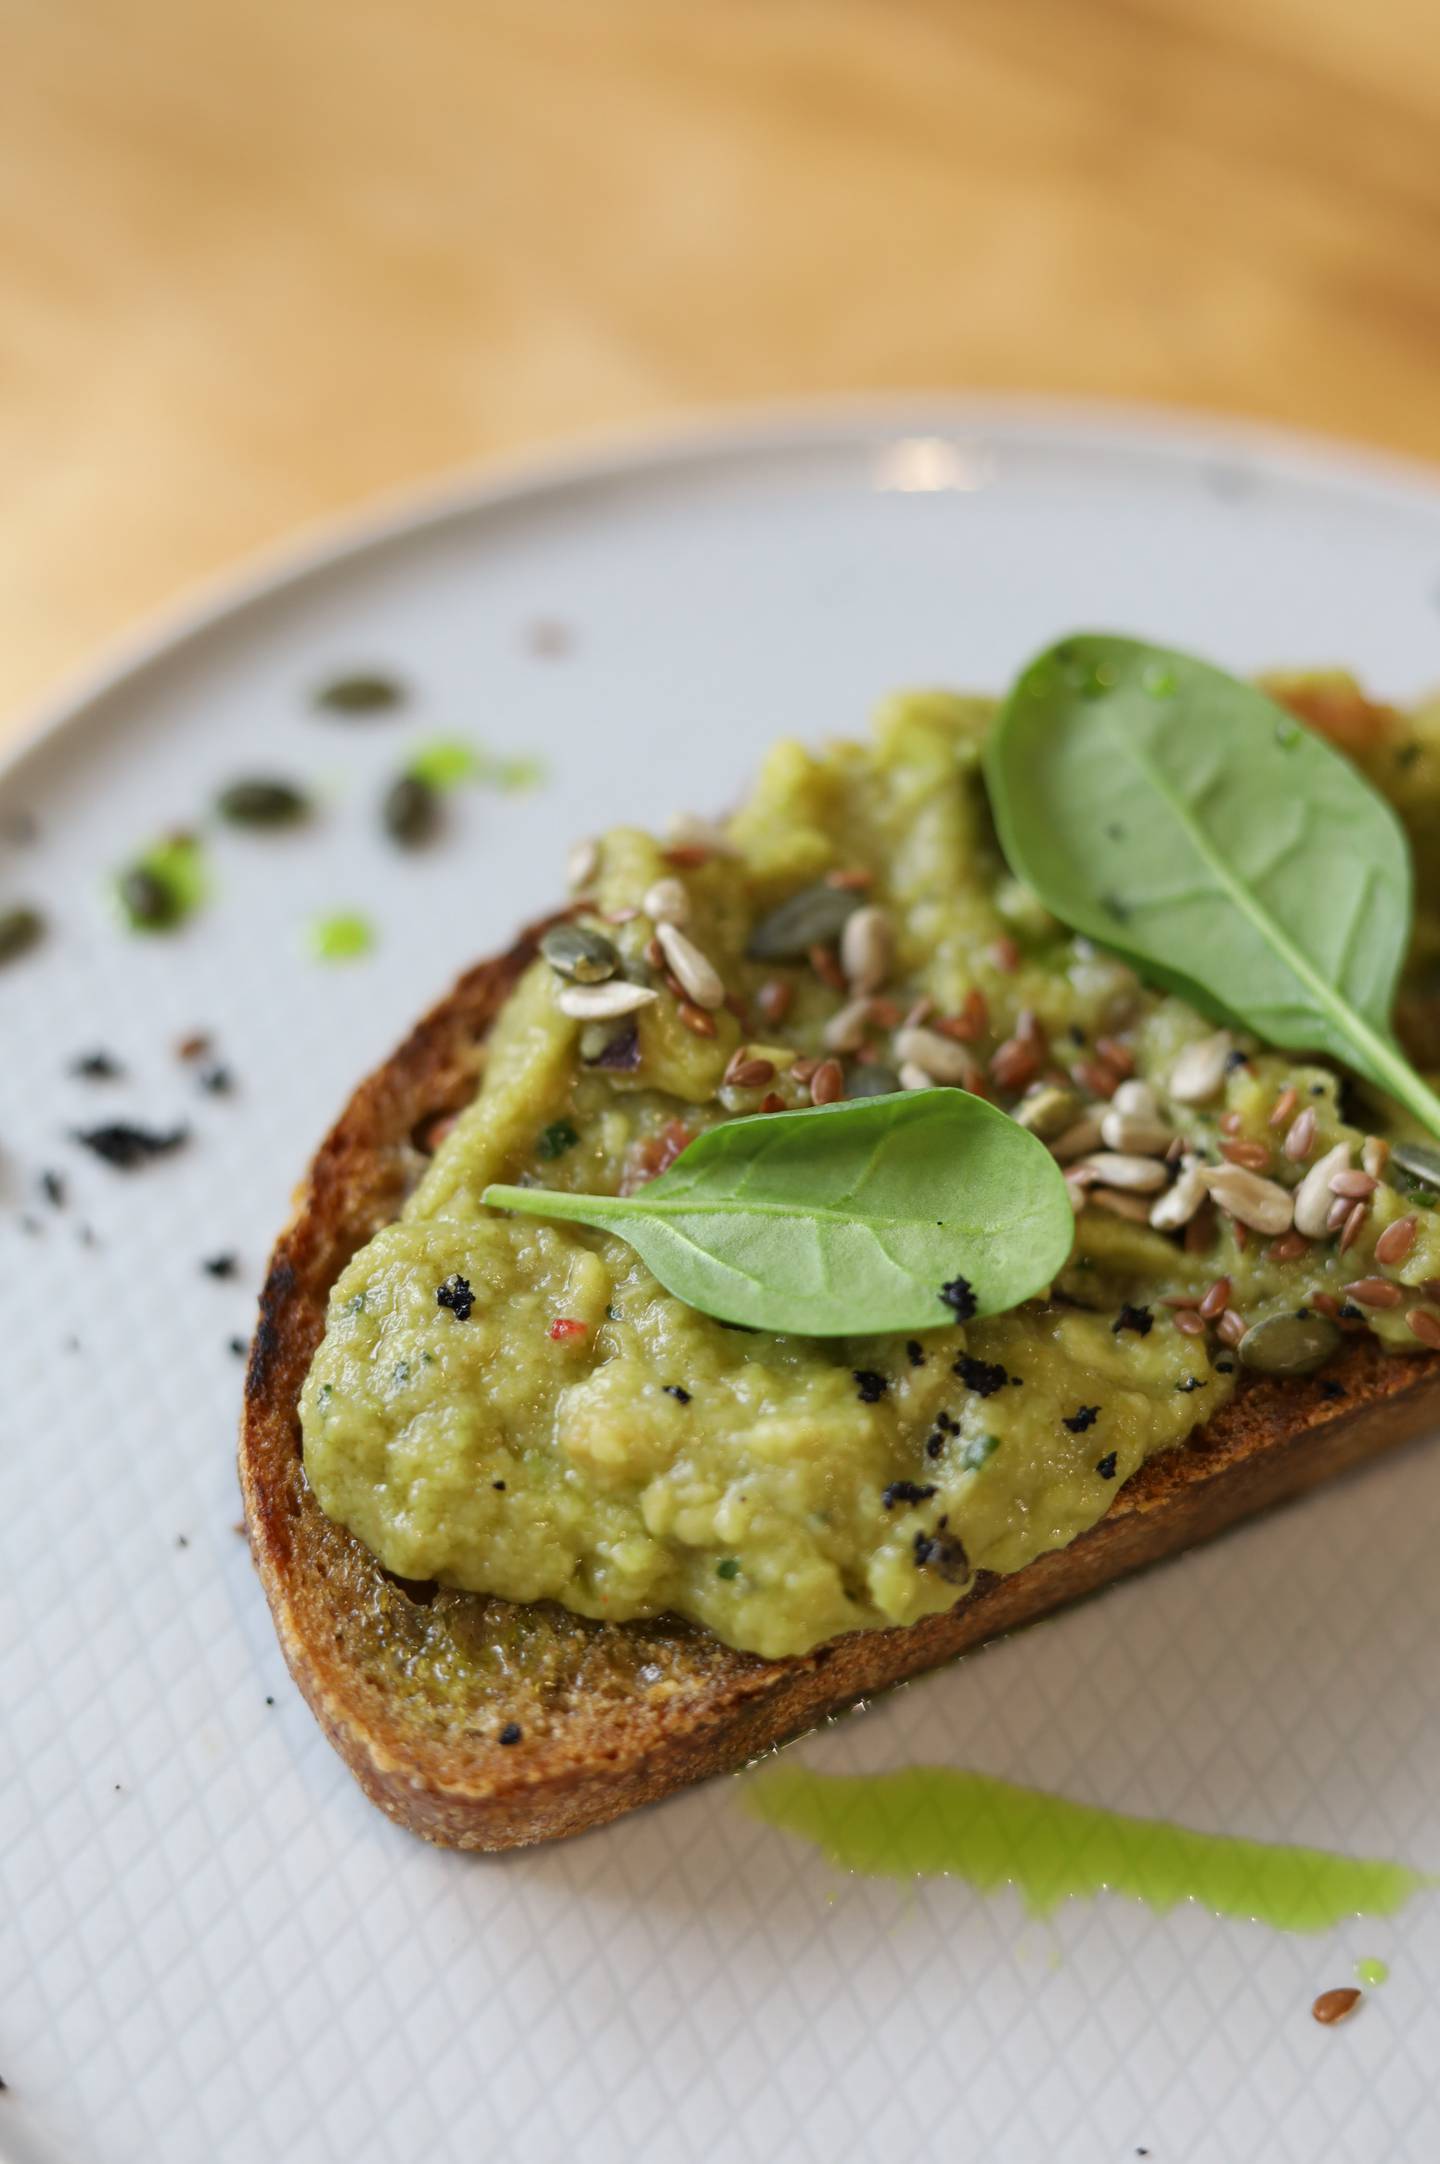 Toast's most recent incarnation cut from an artisanal loaf topped with smashed avocado. Victoria Nazaruk / Unsplash